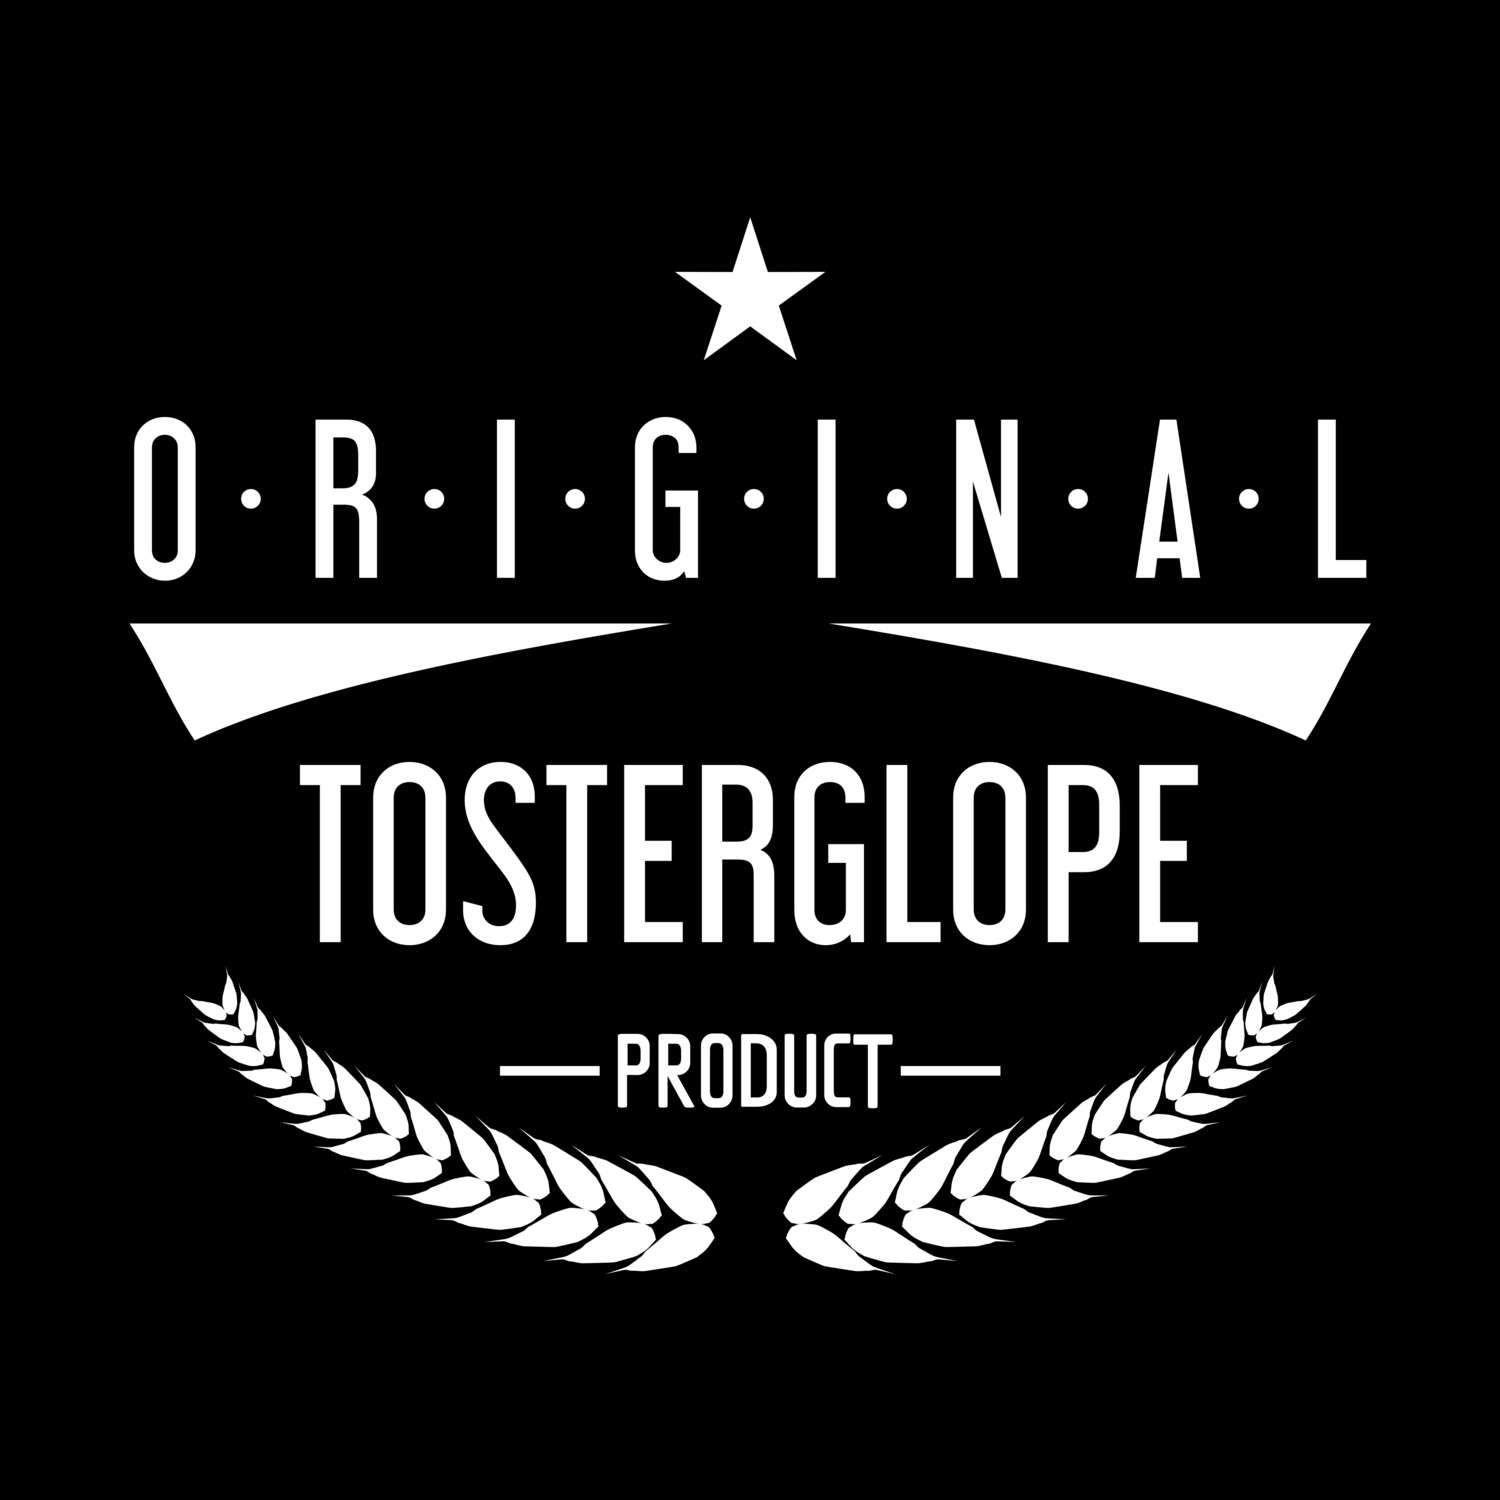 Tosterglope T-Shirt »Original Product«